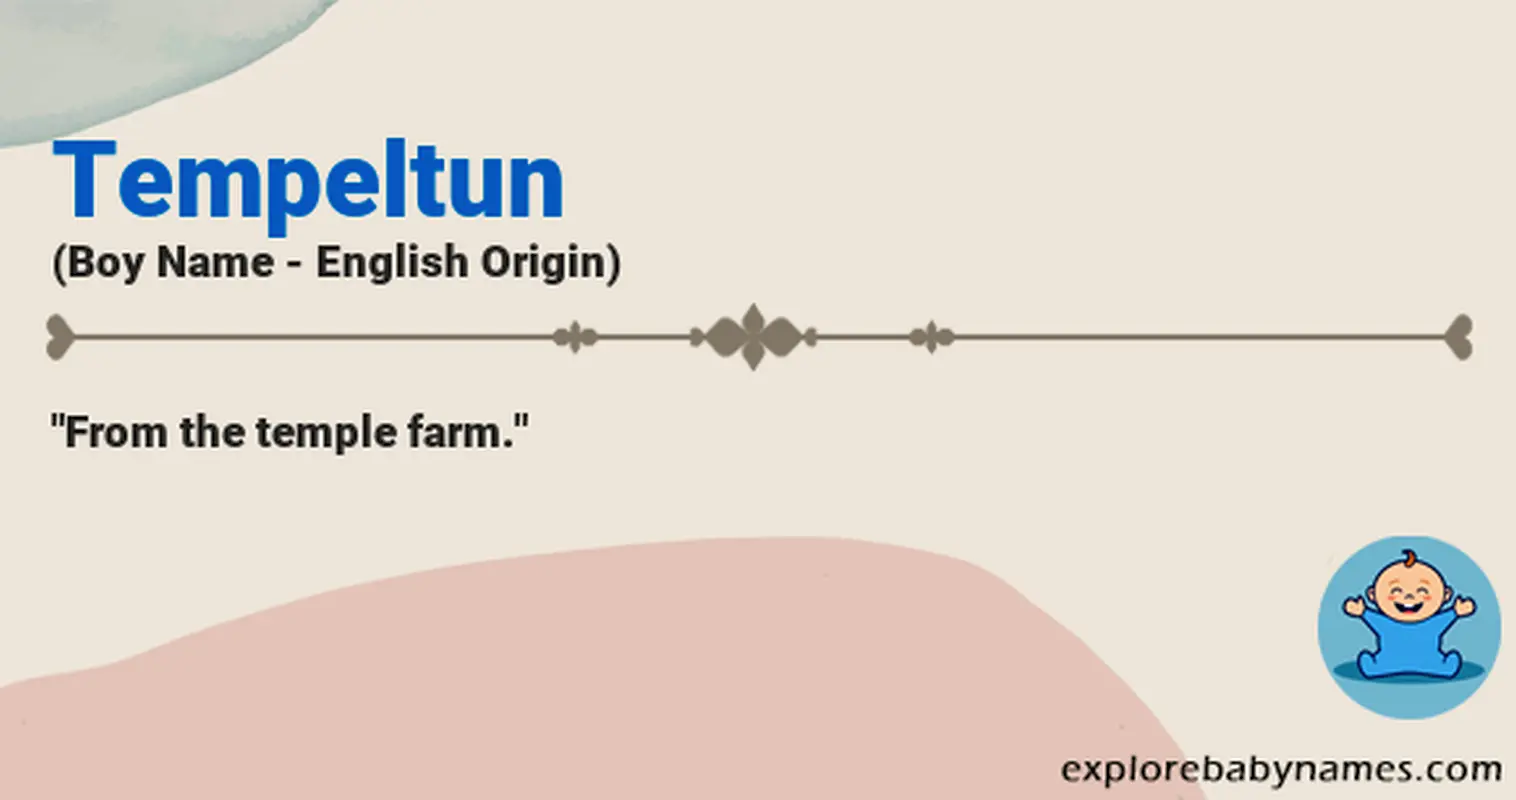 Meaning of Tempeltun